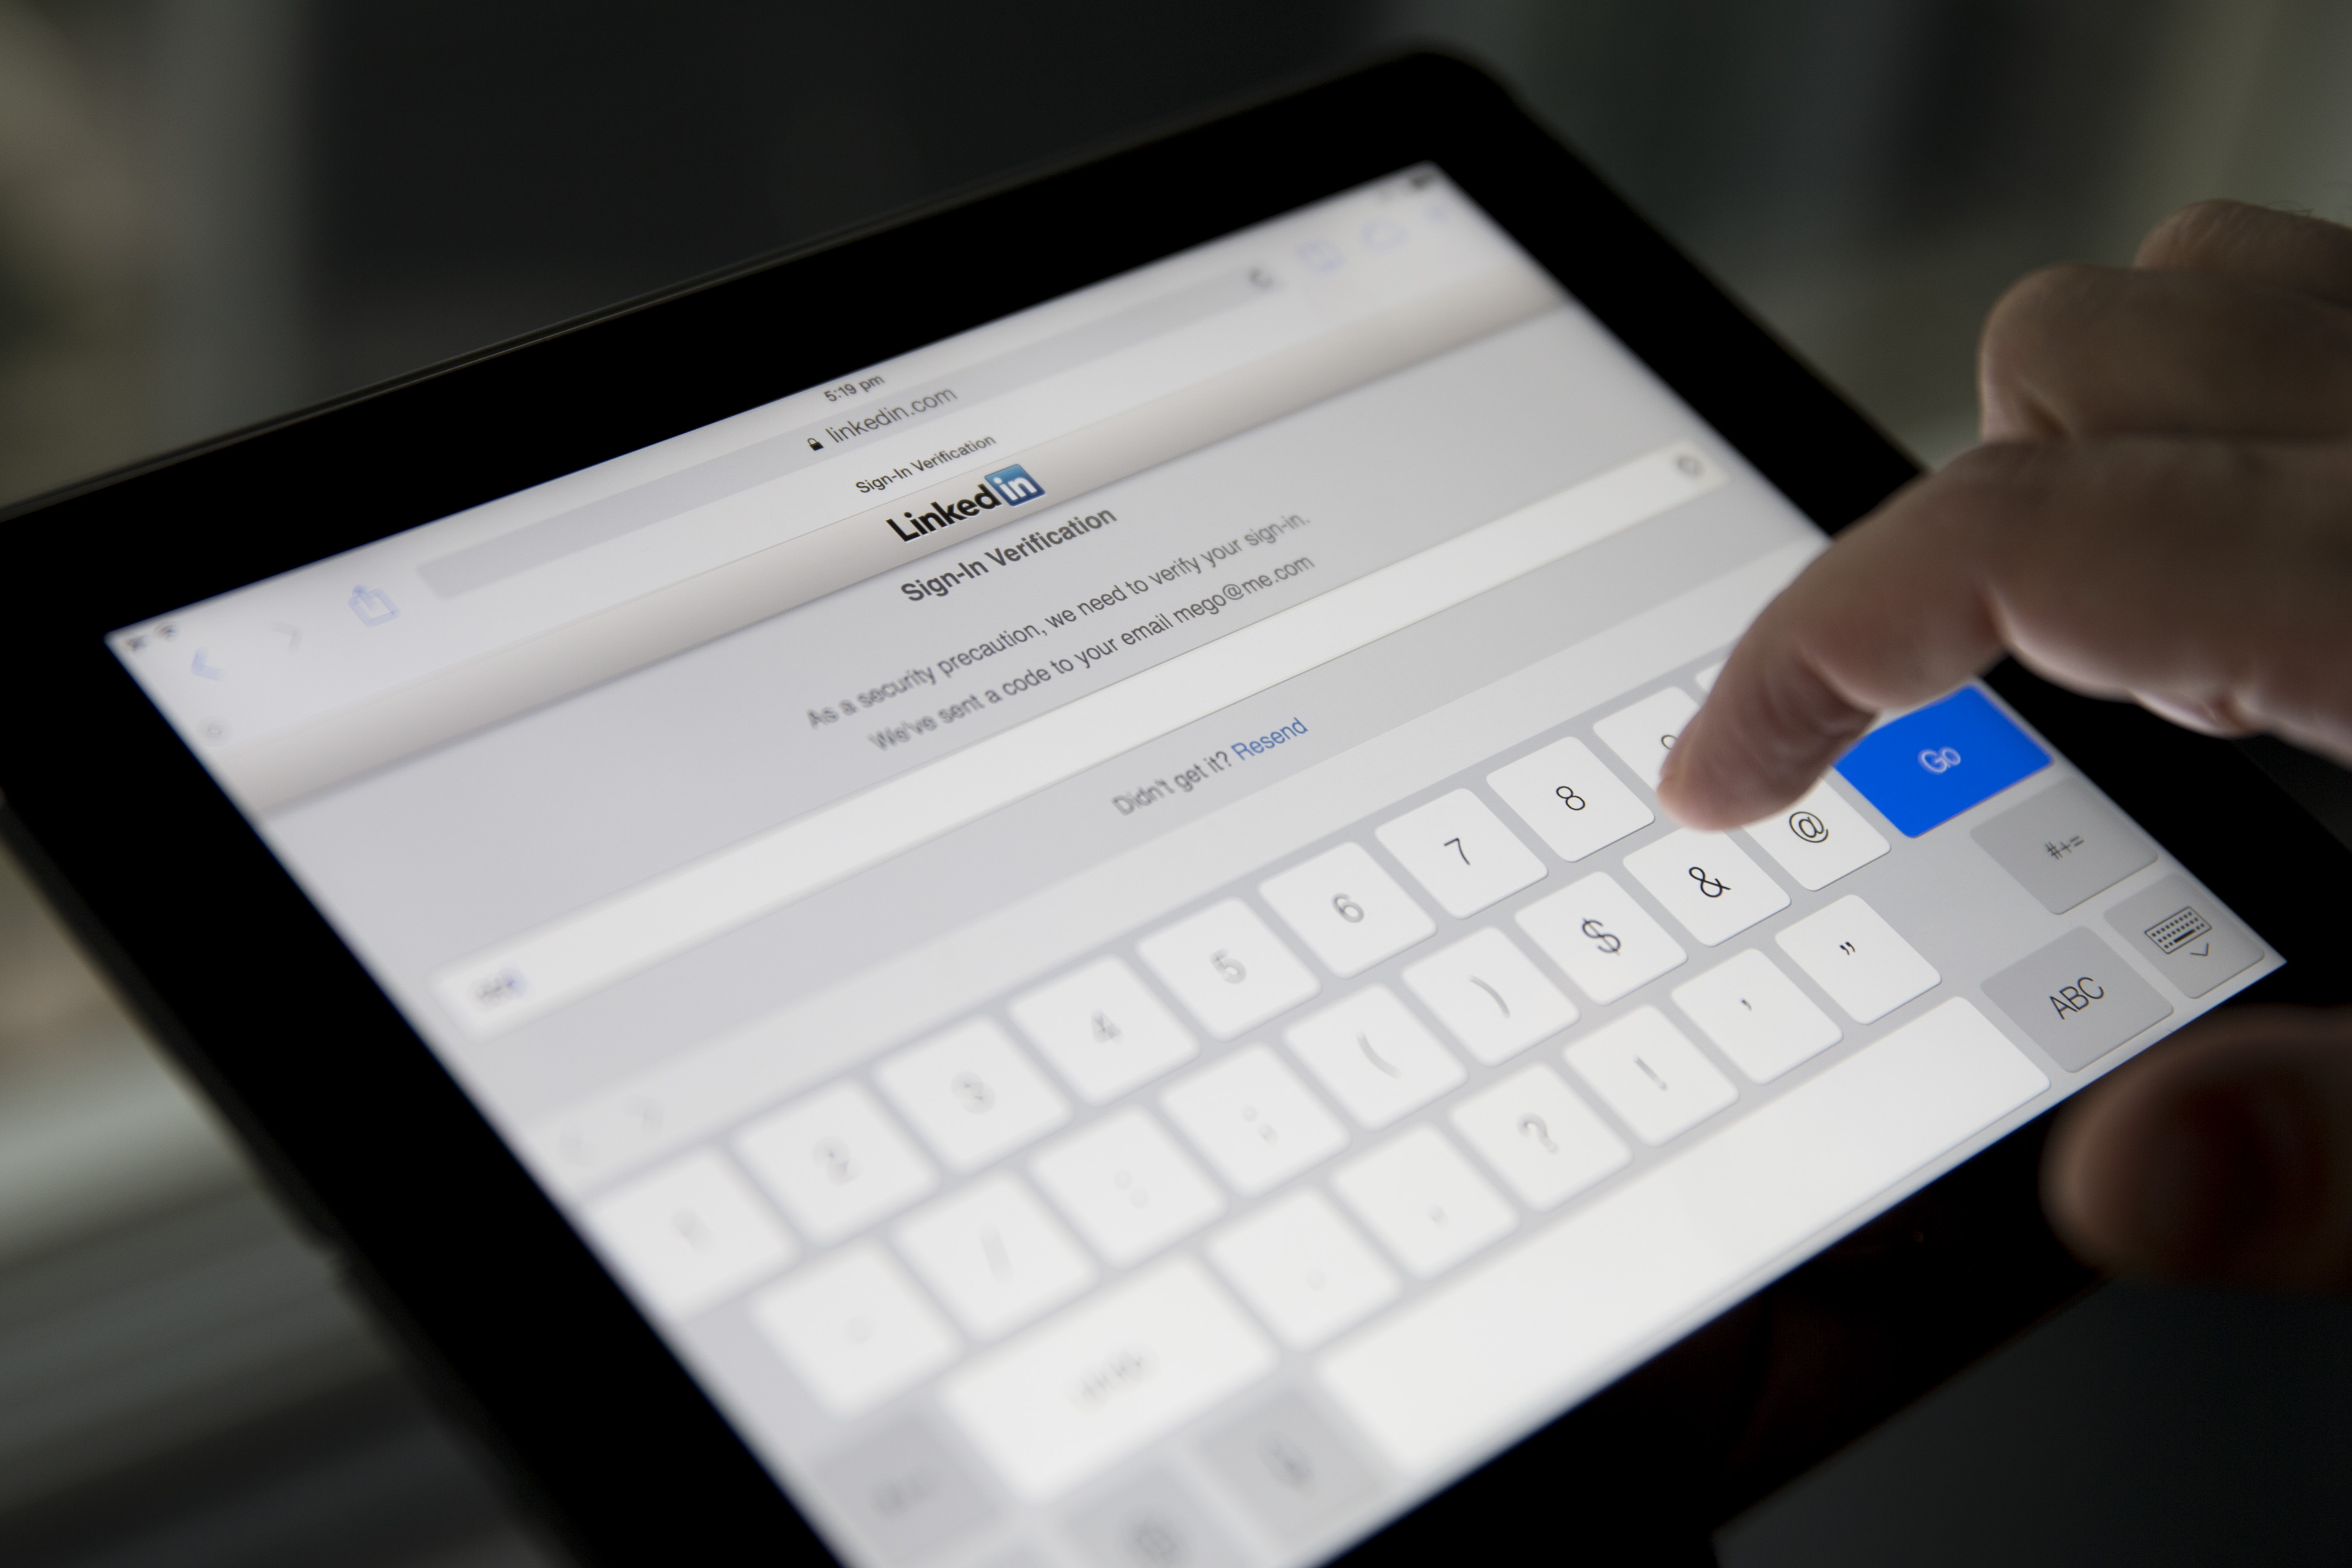 The LinkedIn sign-in page is displayed on an Apple iPad Air in an arranged photograph in Hong Kong, China, on Feb. 25, 2014. (Brent Lewin—Bloomberg/Getty Images)